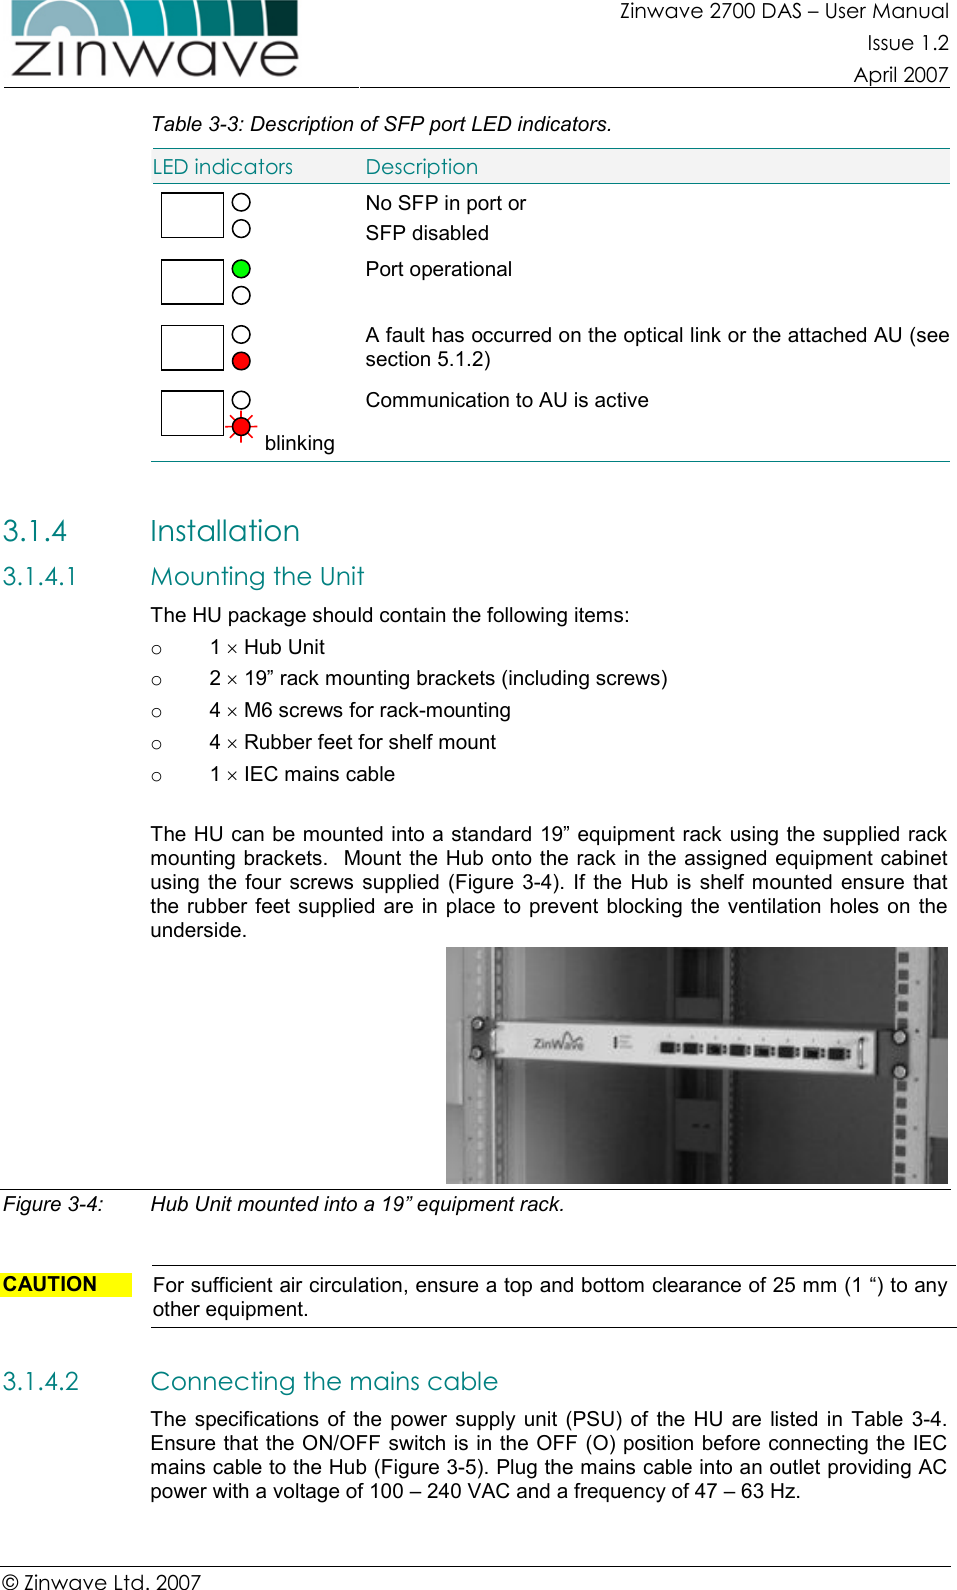 Zinwave 2700 DAS – User Manual Issue 1.2  April 2007  © Zinwave Ltd. 2007  Table 3-3: Description of SFP port LED indicators. LED indicators  Description  No SFP in port or SFP disabled  Port operational  A fault has occurred on the optical link or the attached AU (see section 5.1.2)  blinking Communication to AU is active  3.1.4 Installation 3.1.4.1 Mounting the Unit   The HU package should contain the following items: o  1 × Hub Unit o  2 × 19” rack mounting brackets (including screws) o  4 × M6 screws for rack-mounting o  4 × Rubber feet for shelf mount o  1 × IEC mains cable  The HU can be mounted into a standard 19” equipment rack using the supplied rack mounting brackets.  Mount the Hub onto the rack in the assigned equipment cabinet using the  four  screws supplied  (Figure  3-4). If  the Hub  is shelf  mounted  ensure  that the rubber  feet supplied  are in place  to prevent  blocking the  ventilation holes  on  the underside.  Figure 3-4:  Hub Unit mounted into a 19” equipment rack.    CAUTION  For sufficient air circulation, ensure a top and bottom clearance of 25 mm (1 “) to any other equipment.  3.1.4.2 Connecting the mains cable The  specifications  of the  power  supply  unit  (PSU)  of  the  HU are  listed  in  Table  3-4. Ensure that the ON/OFF switch is in the OFF (O) position before connecting the IEC mains cable to the Hub (Figure 3-5). Plug the mains cable into an outlet providing AC power with a voltage of 100 – 240 VAC and a frequency of 47 – 63 Hz.  